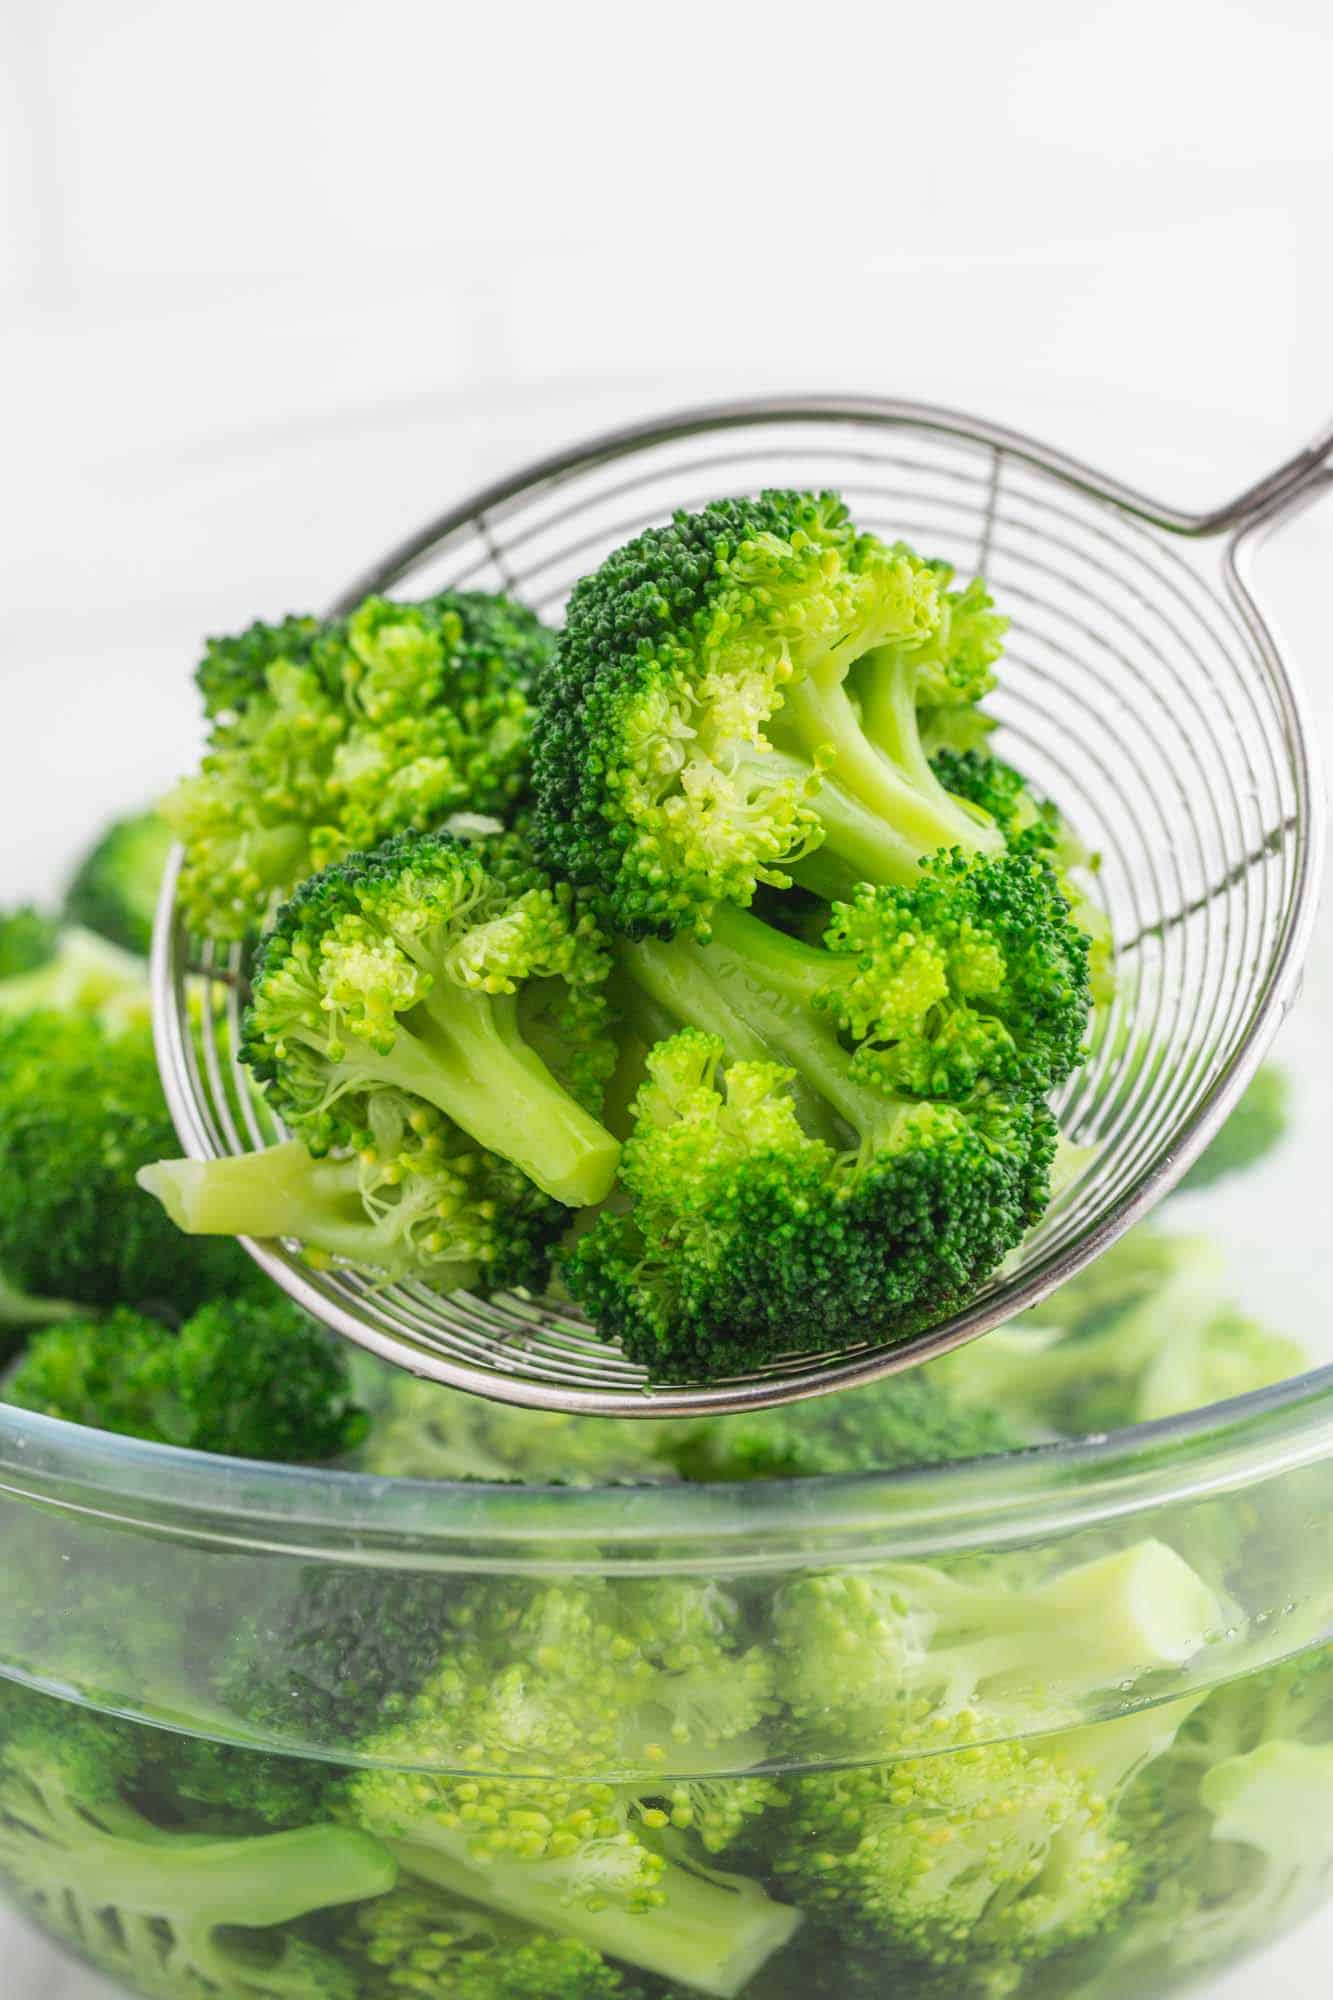 Blanched broccoli in a spider strainer